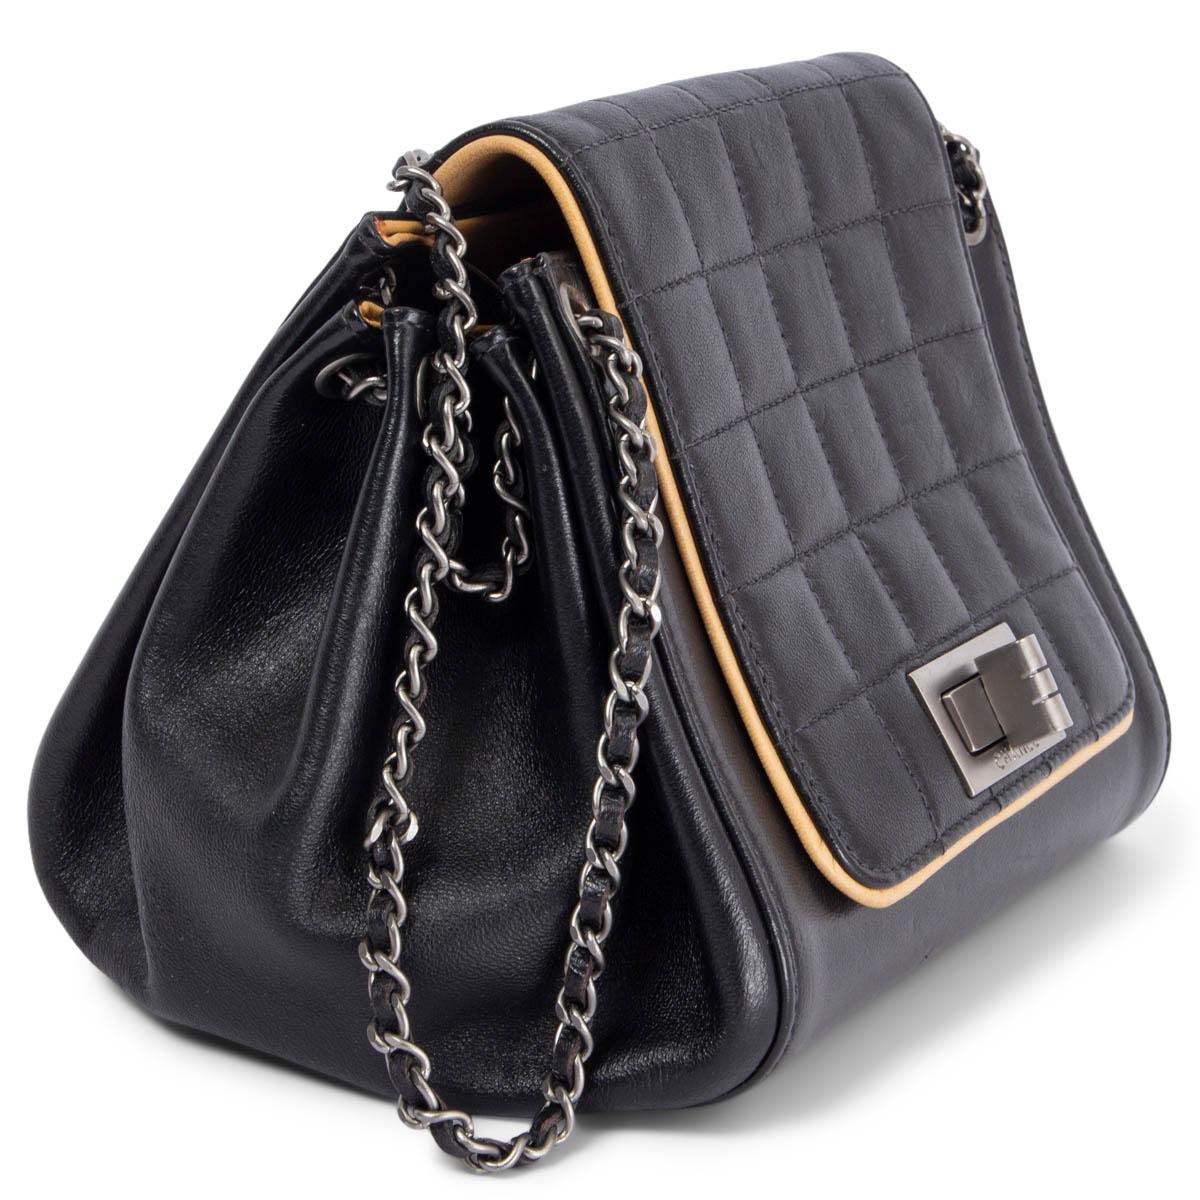 100% authentic Chanel small accordion handbag in black calfskin with beige pipping and light gunmetal hardware. Opens with a classic turn-lock and is lined in beige smooth lambskin with one open pocket against the back. Has been carried and is in